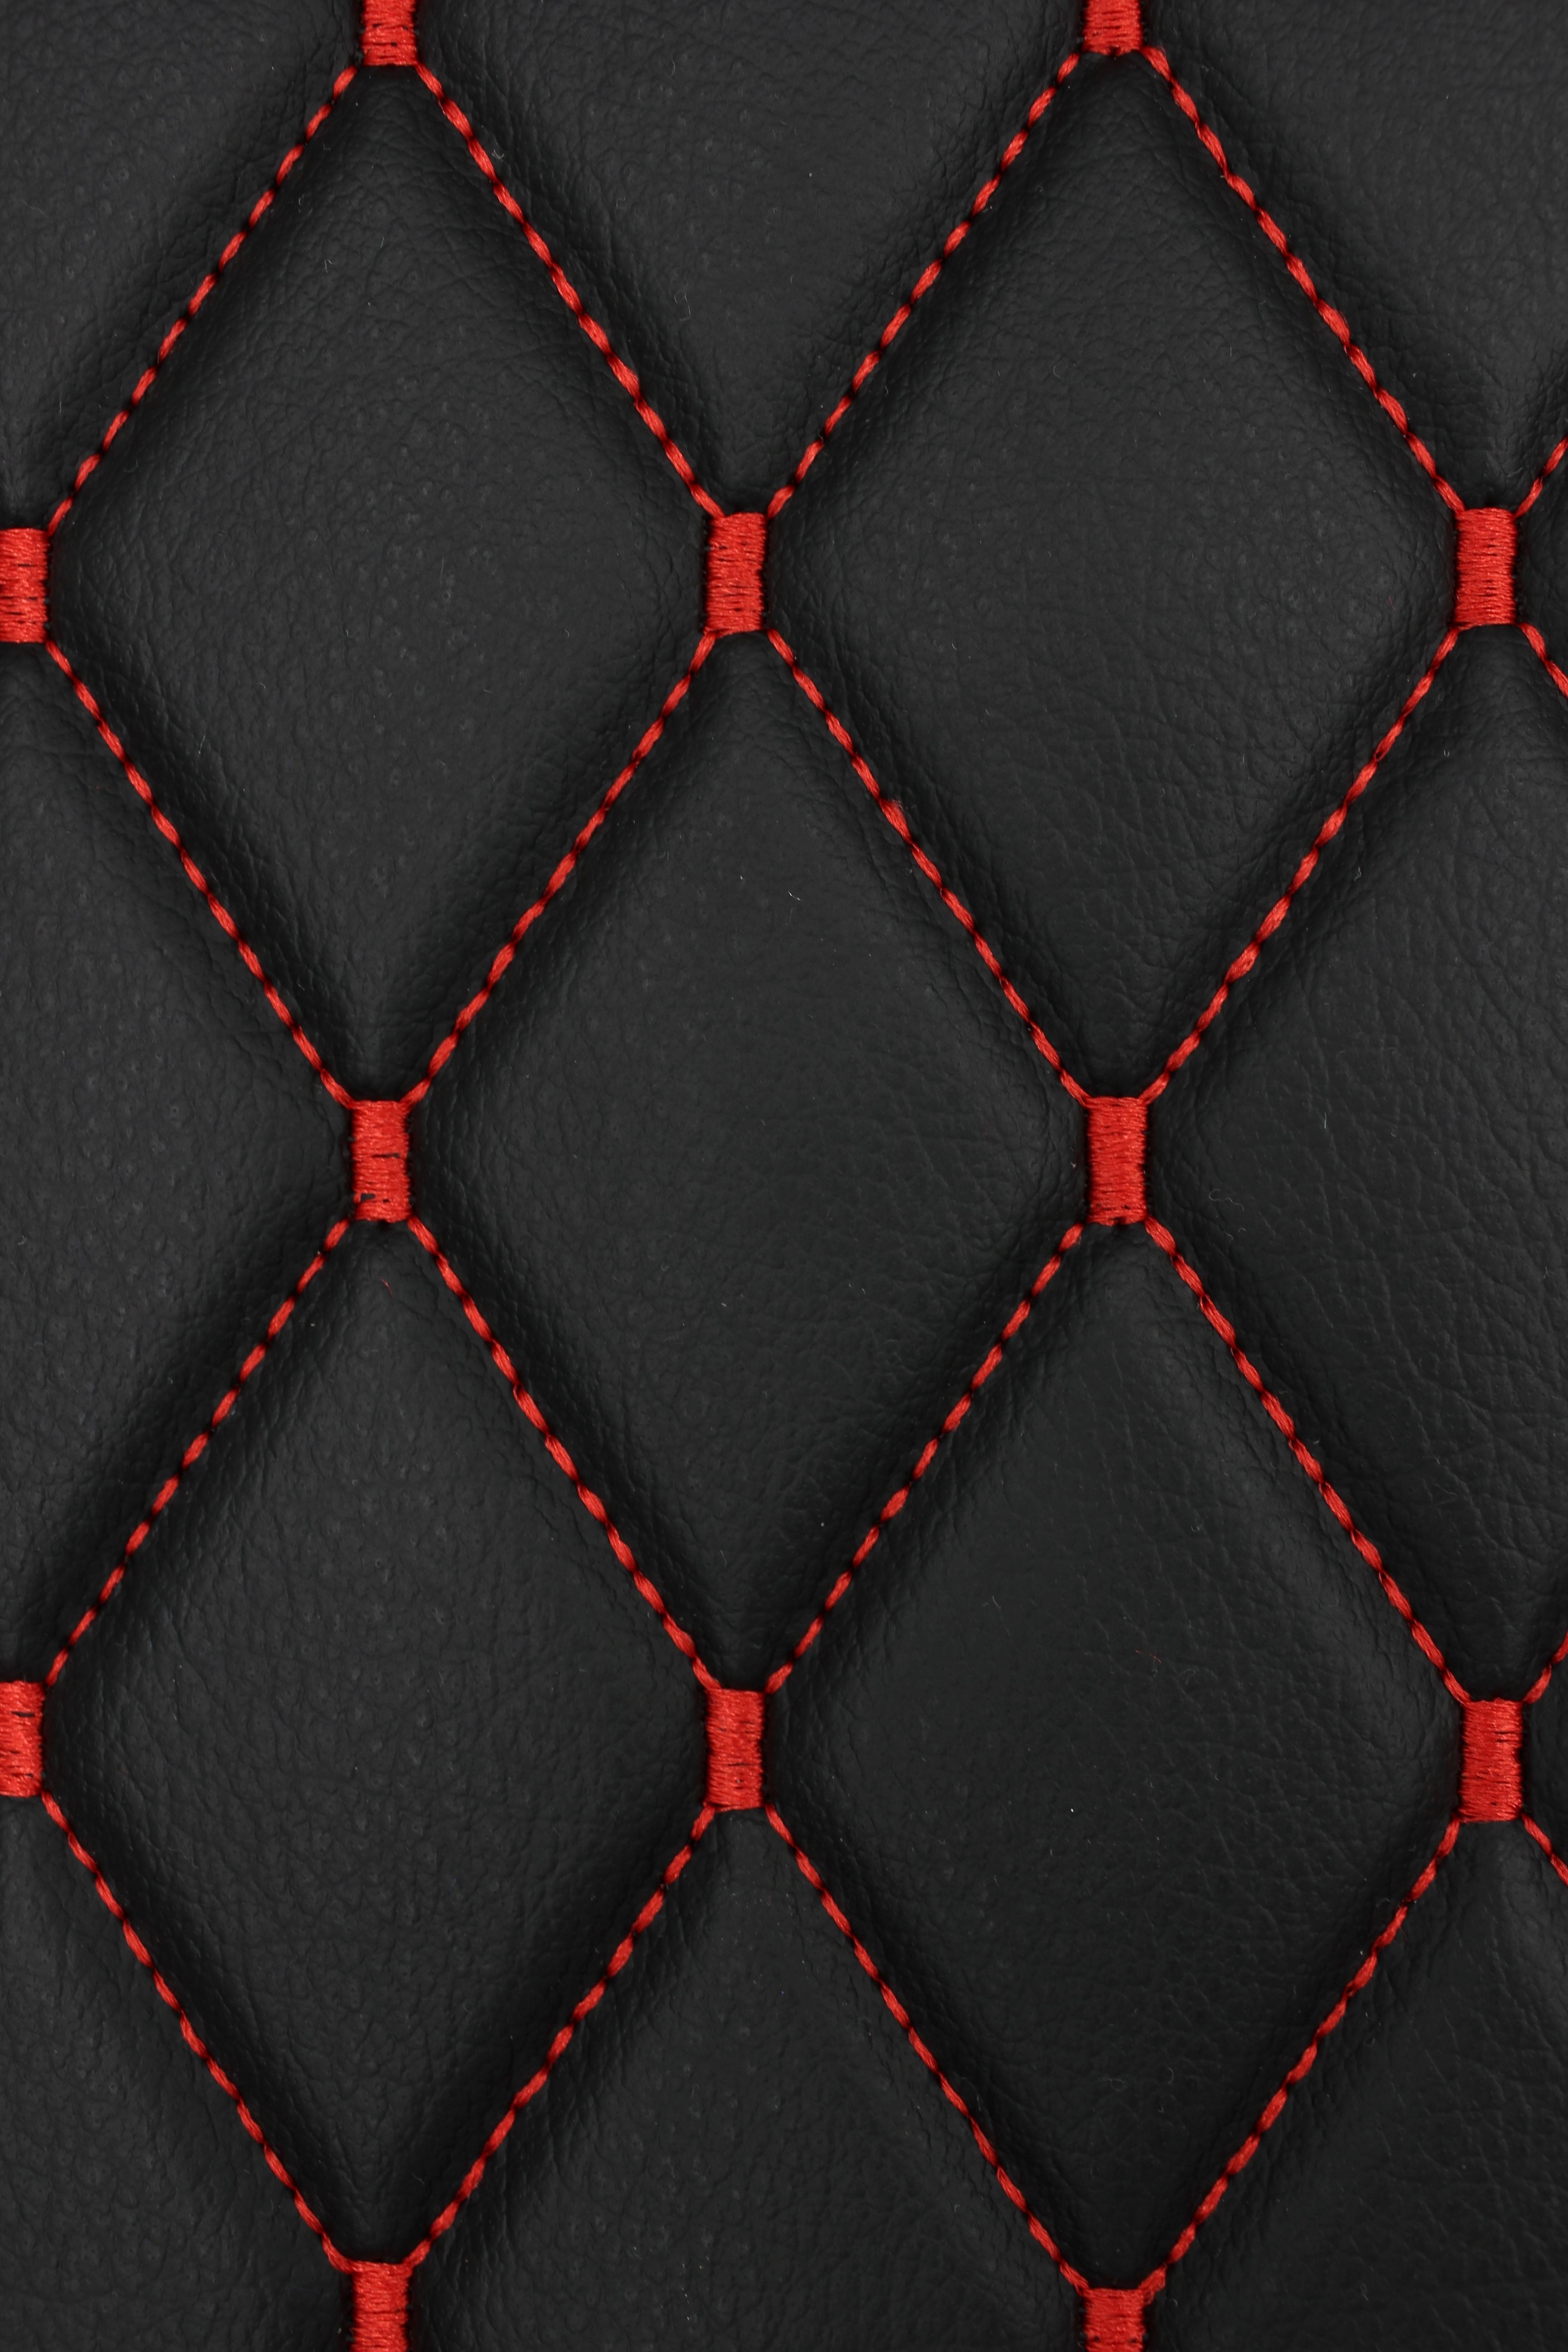 Red Quilted Black Vinyl Grain Faux Leather Car Upholstery Fabric | 2"x3" - 5x8cm Diamond Stitch with Foam | 140cm & 55.1" Wide | Artificial Leather